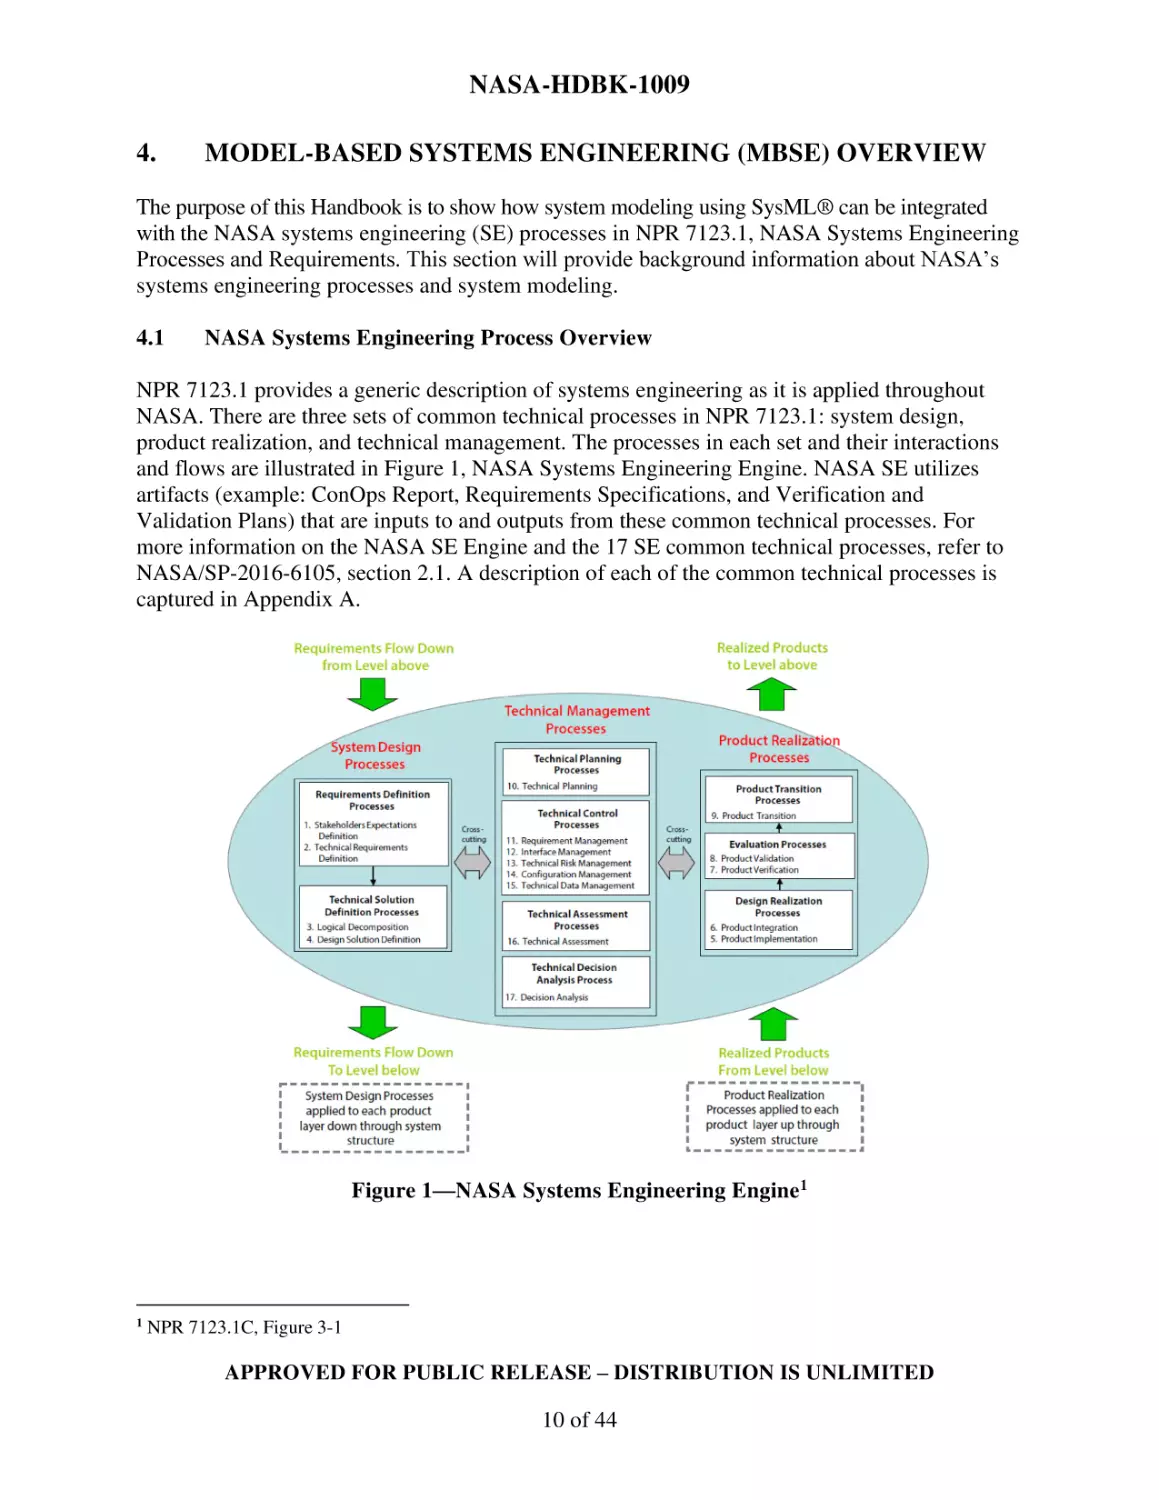 4. MODEL-BASED SYSTEMS ENGINEERING (MBSE) OVERVIEW
4.1  NASA Systems Engineering Process Overview